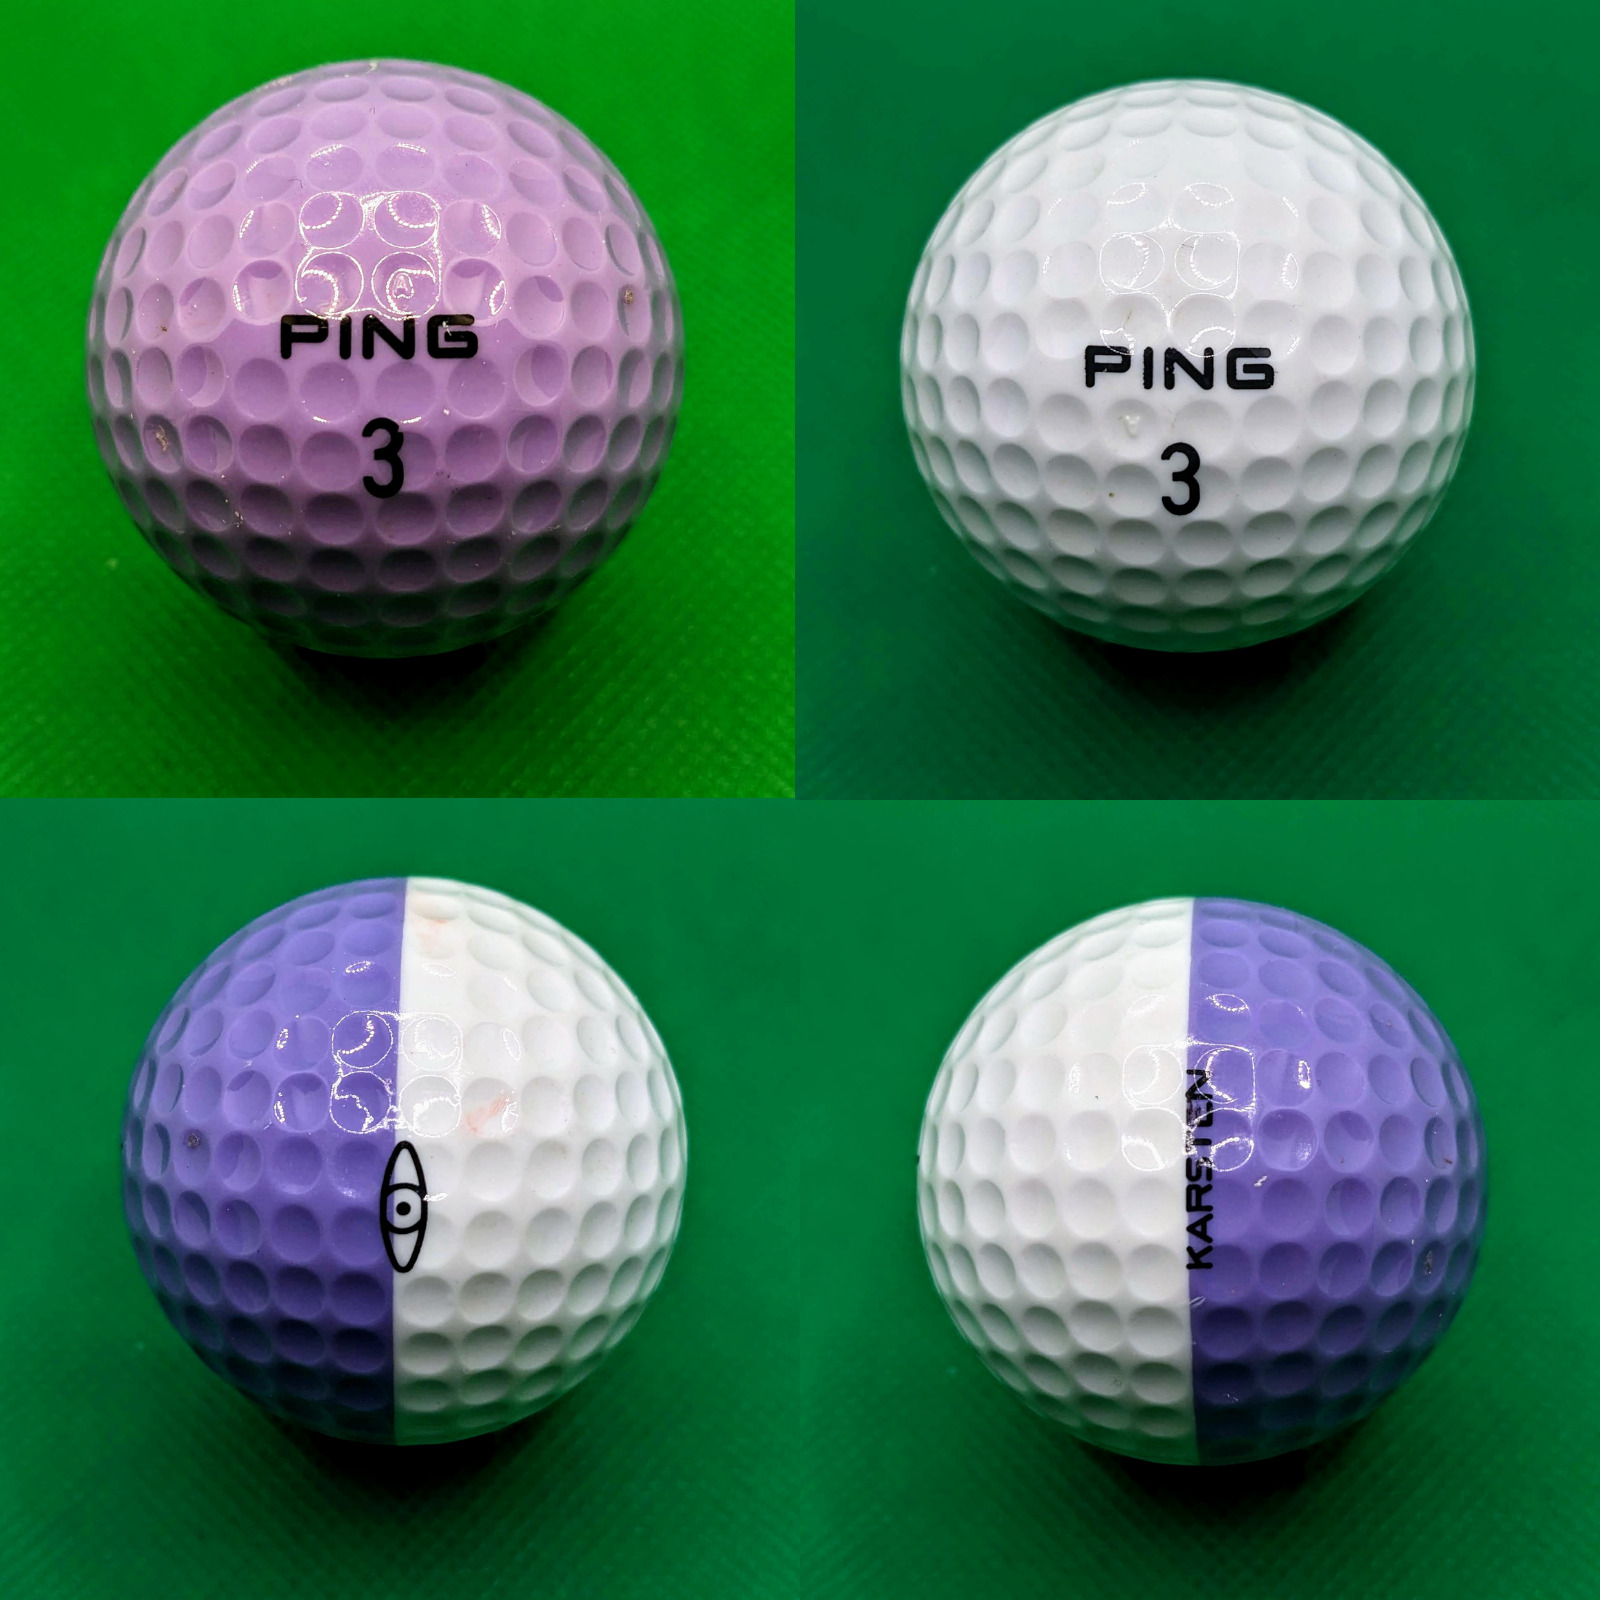 Lavender and White Ping golf ball in Great Condition!